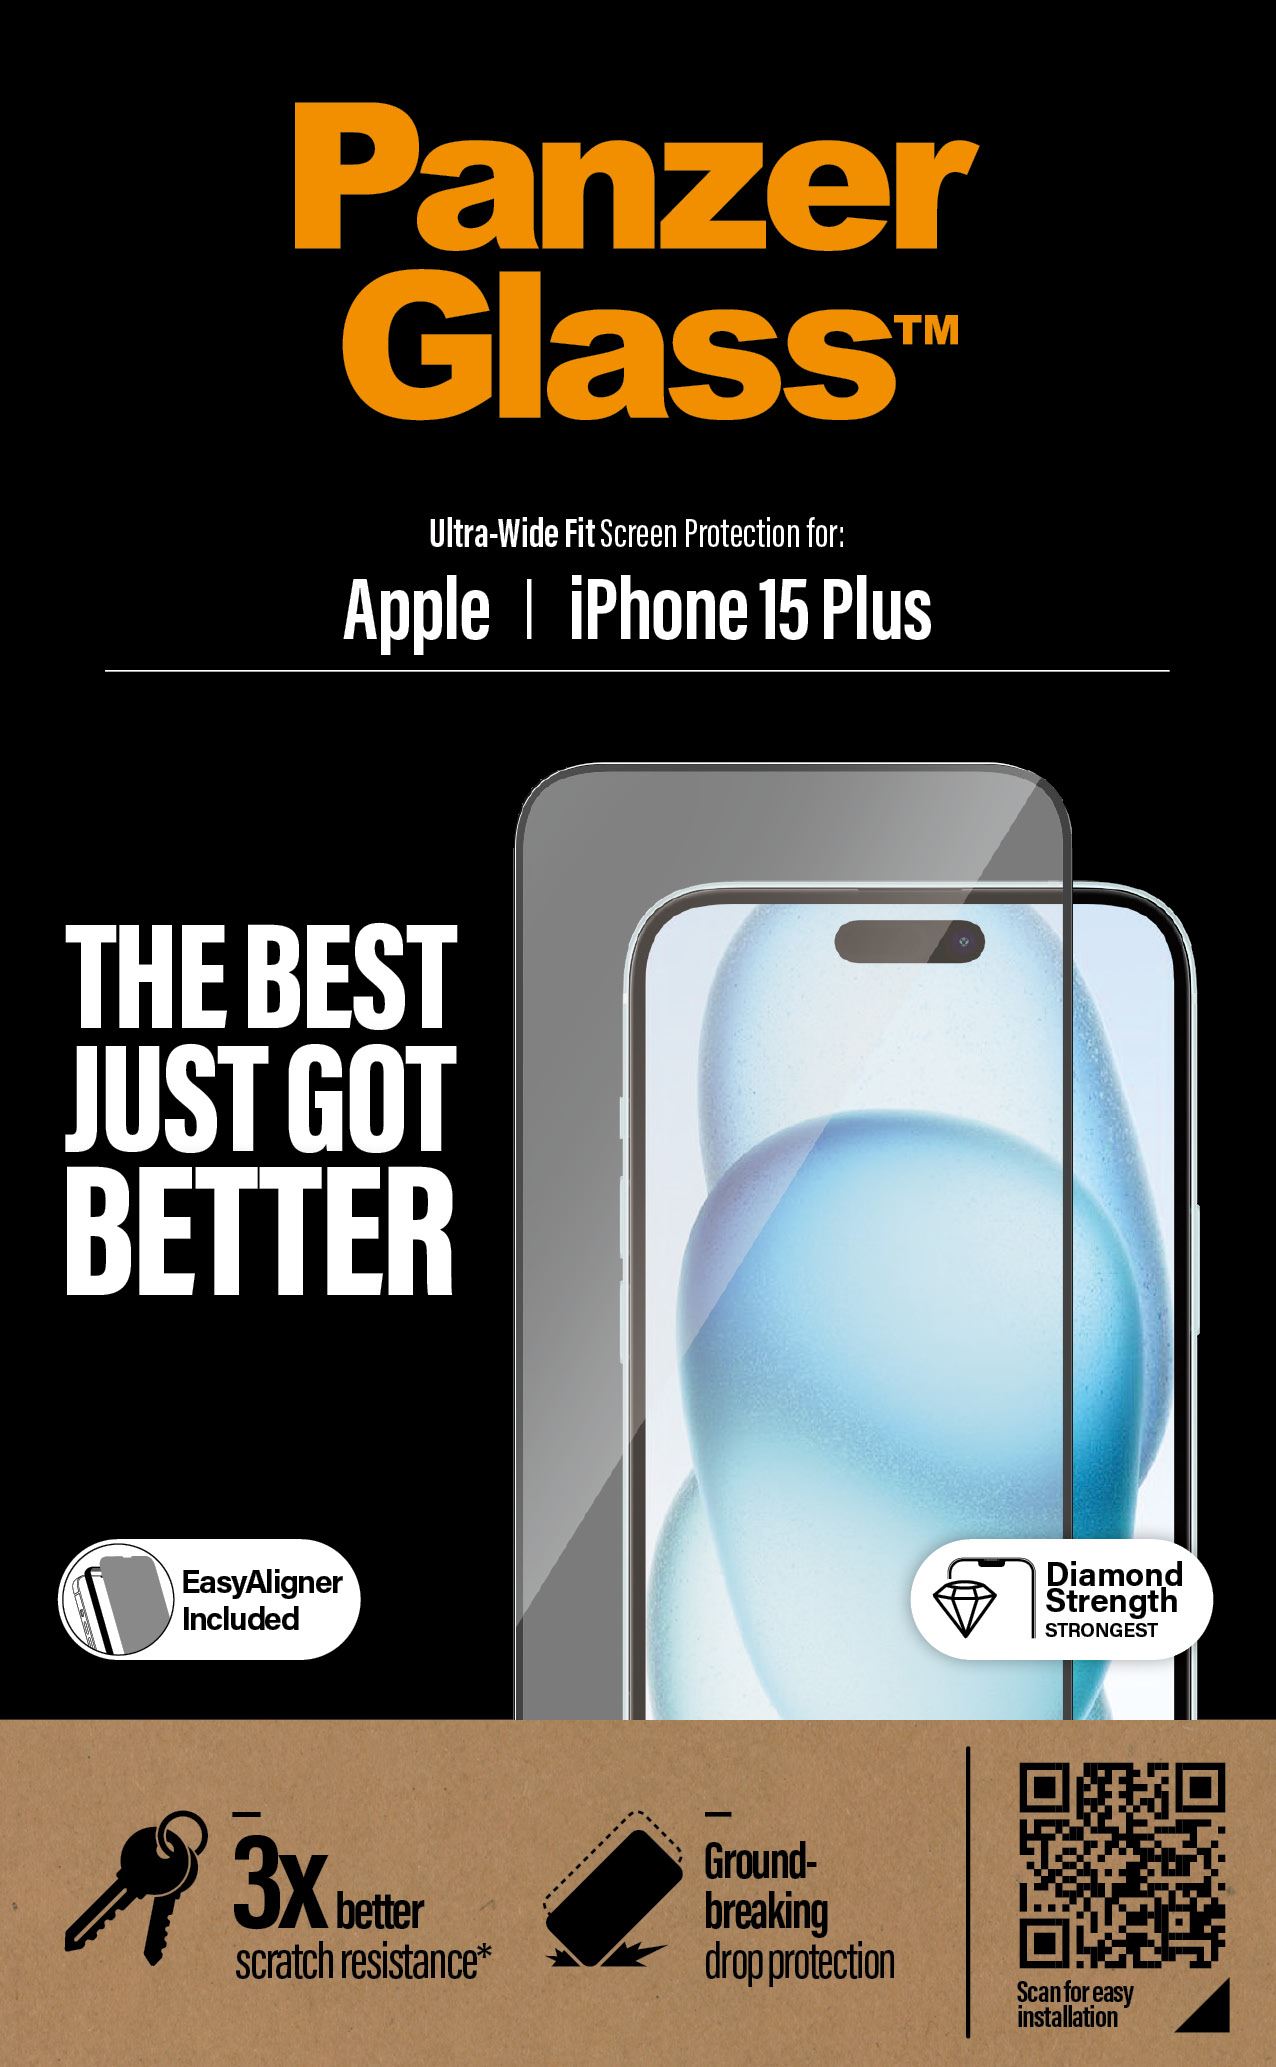 PanzerGlass Apple iPhone 15 Plus - Ultra-Wide Fit with EasyAligner